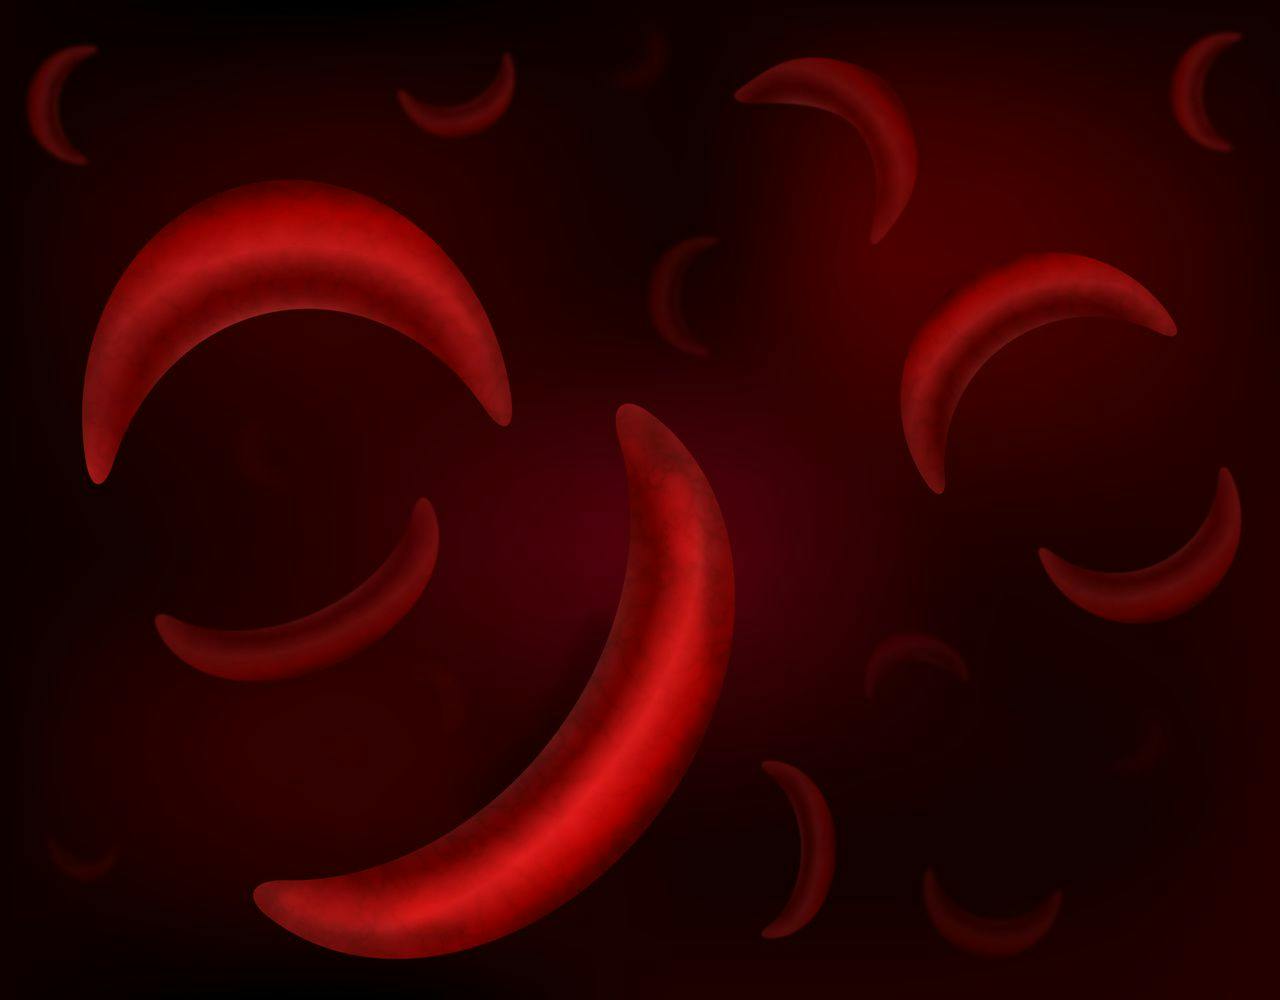 Patient Perception of Sickle Cell Care Differs by Acute vs Nonacute Settings